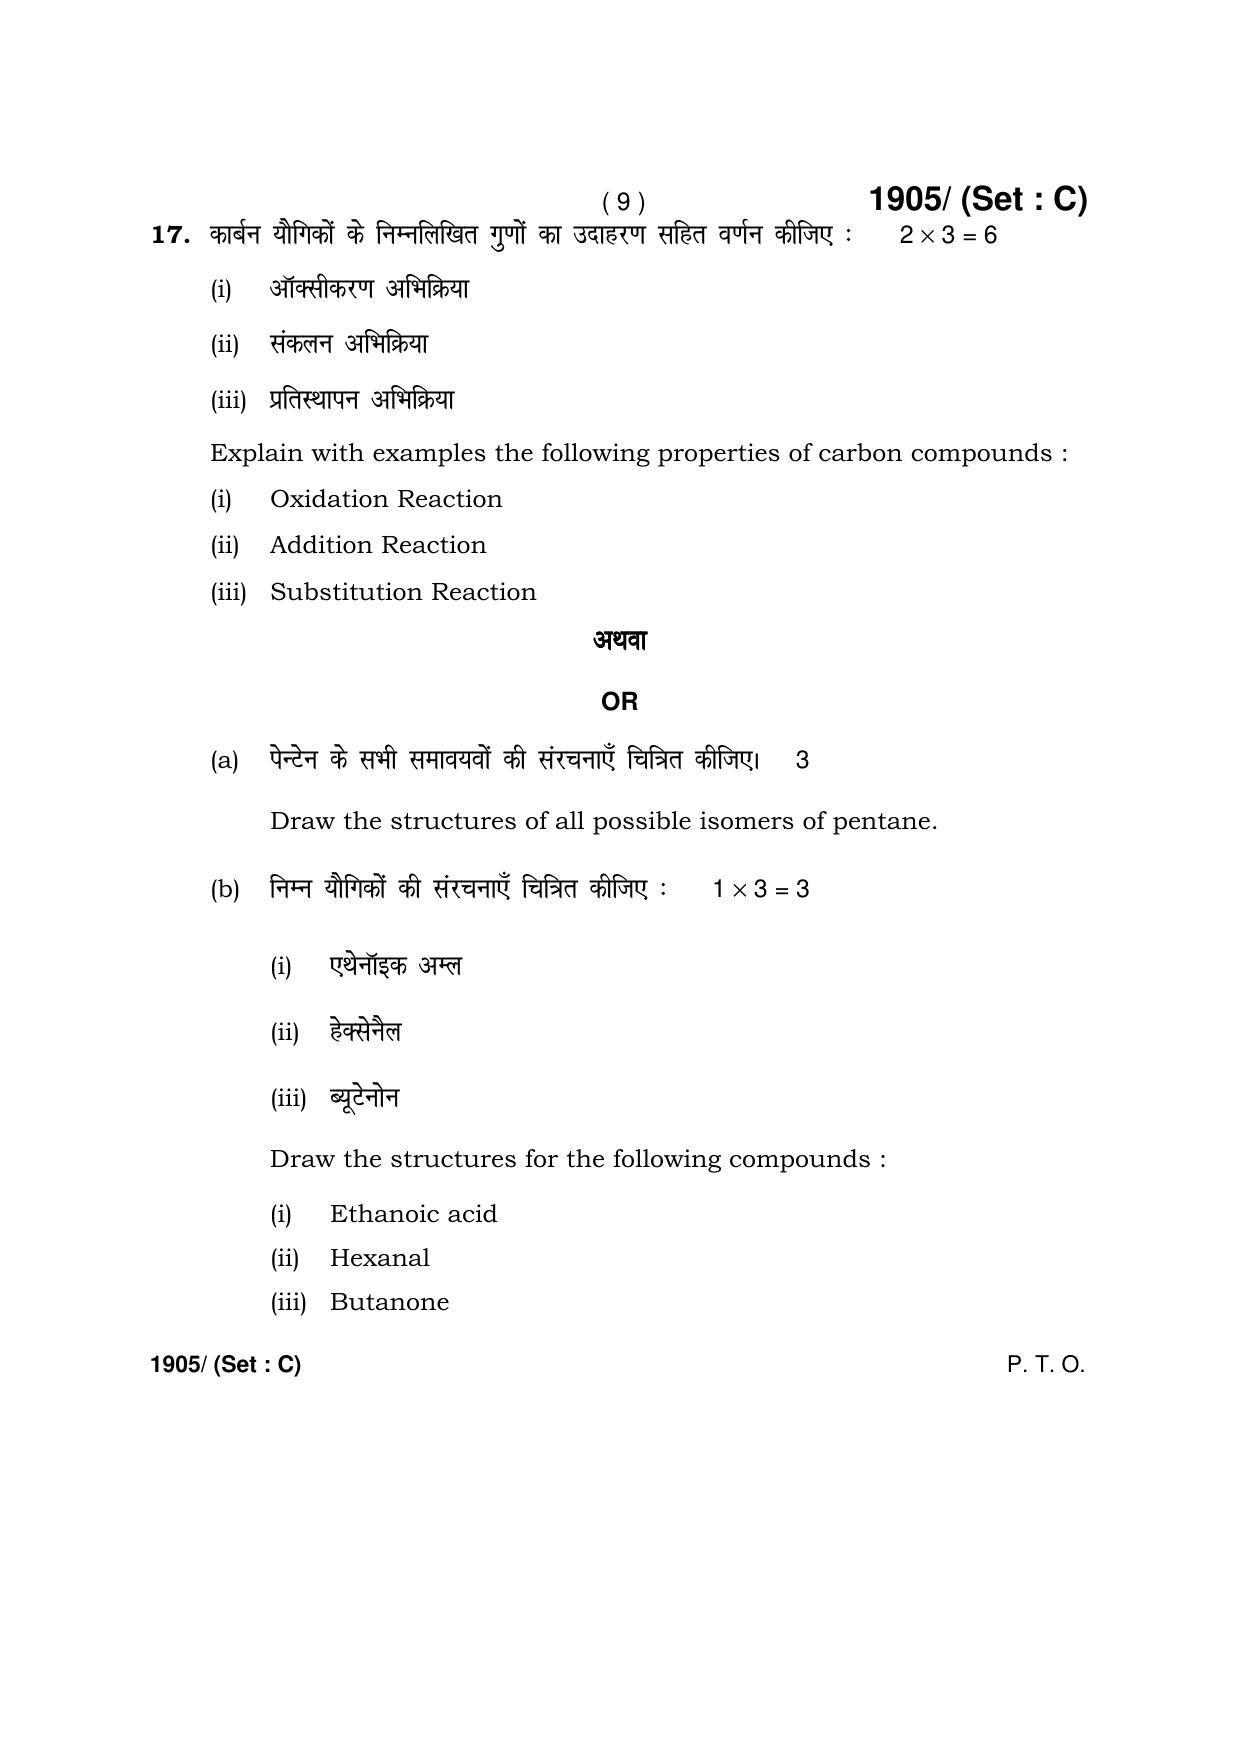 Haryana Board HBSE Class 10 Science -C 2017 Question Paper - Page 9